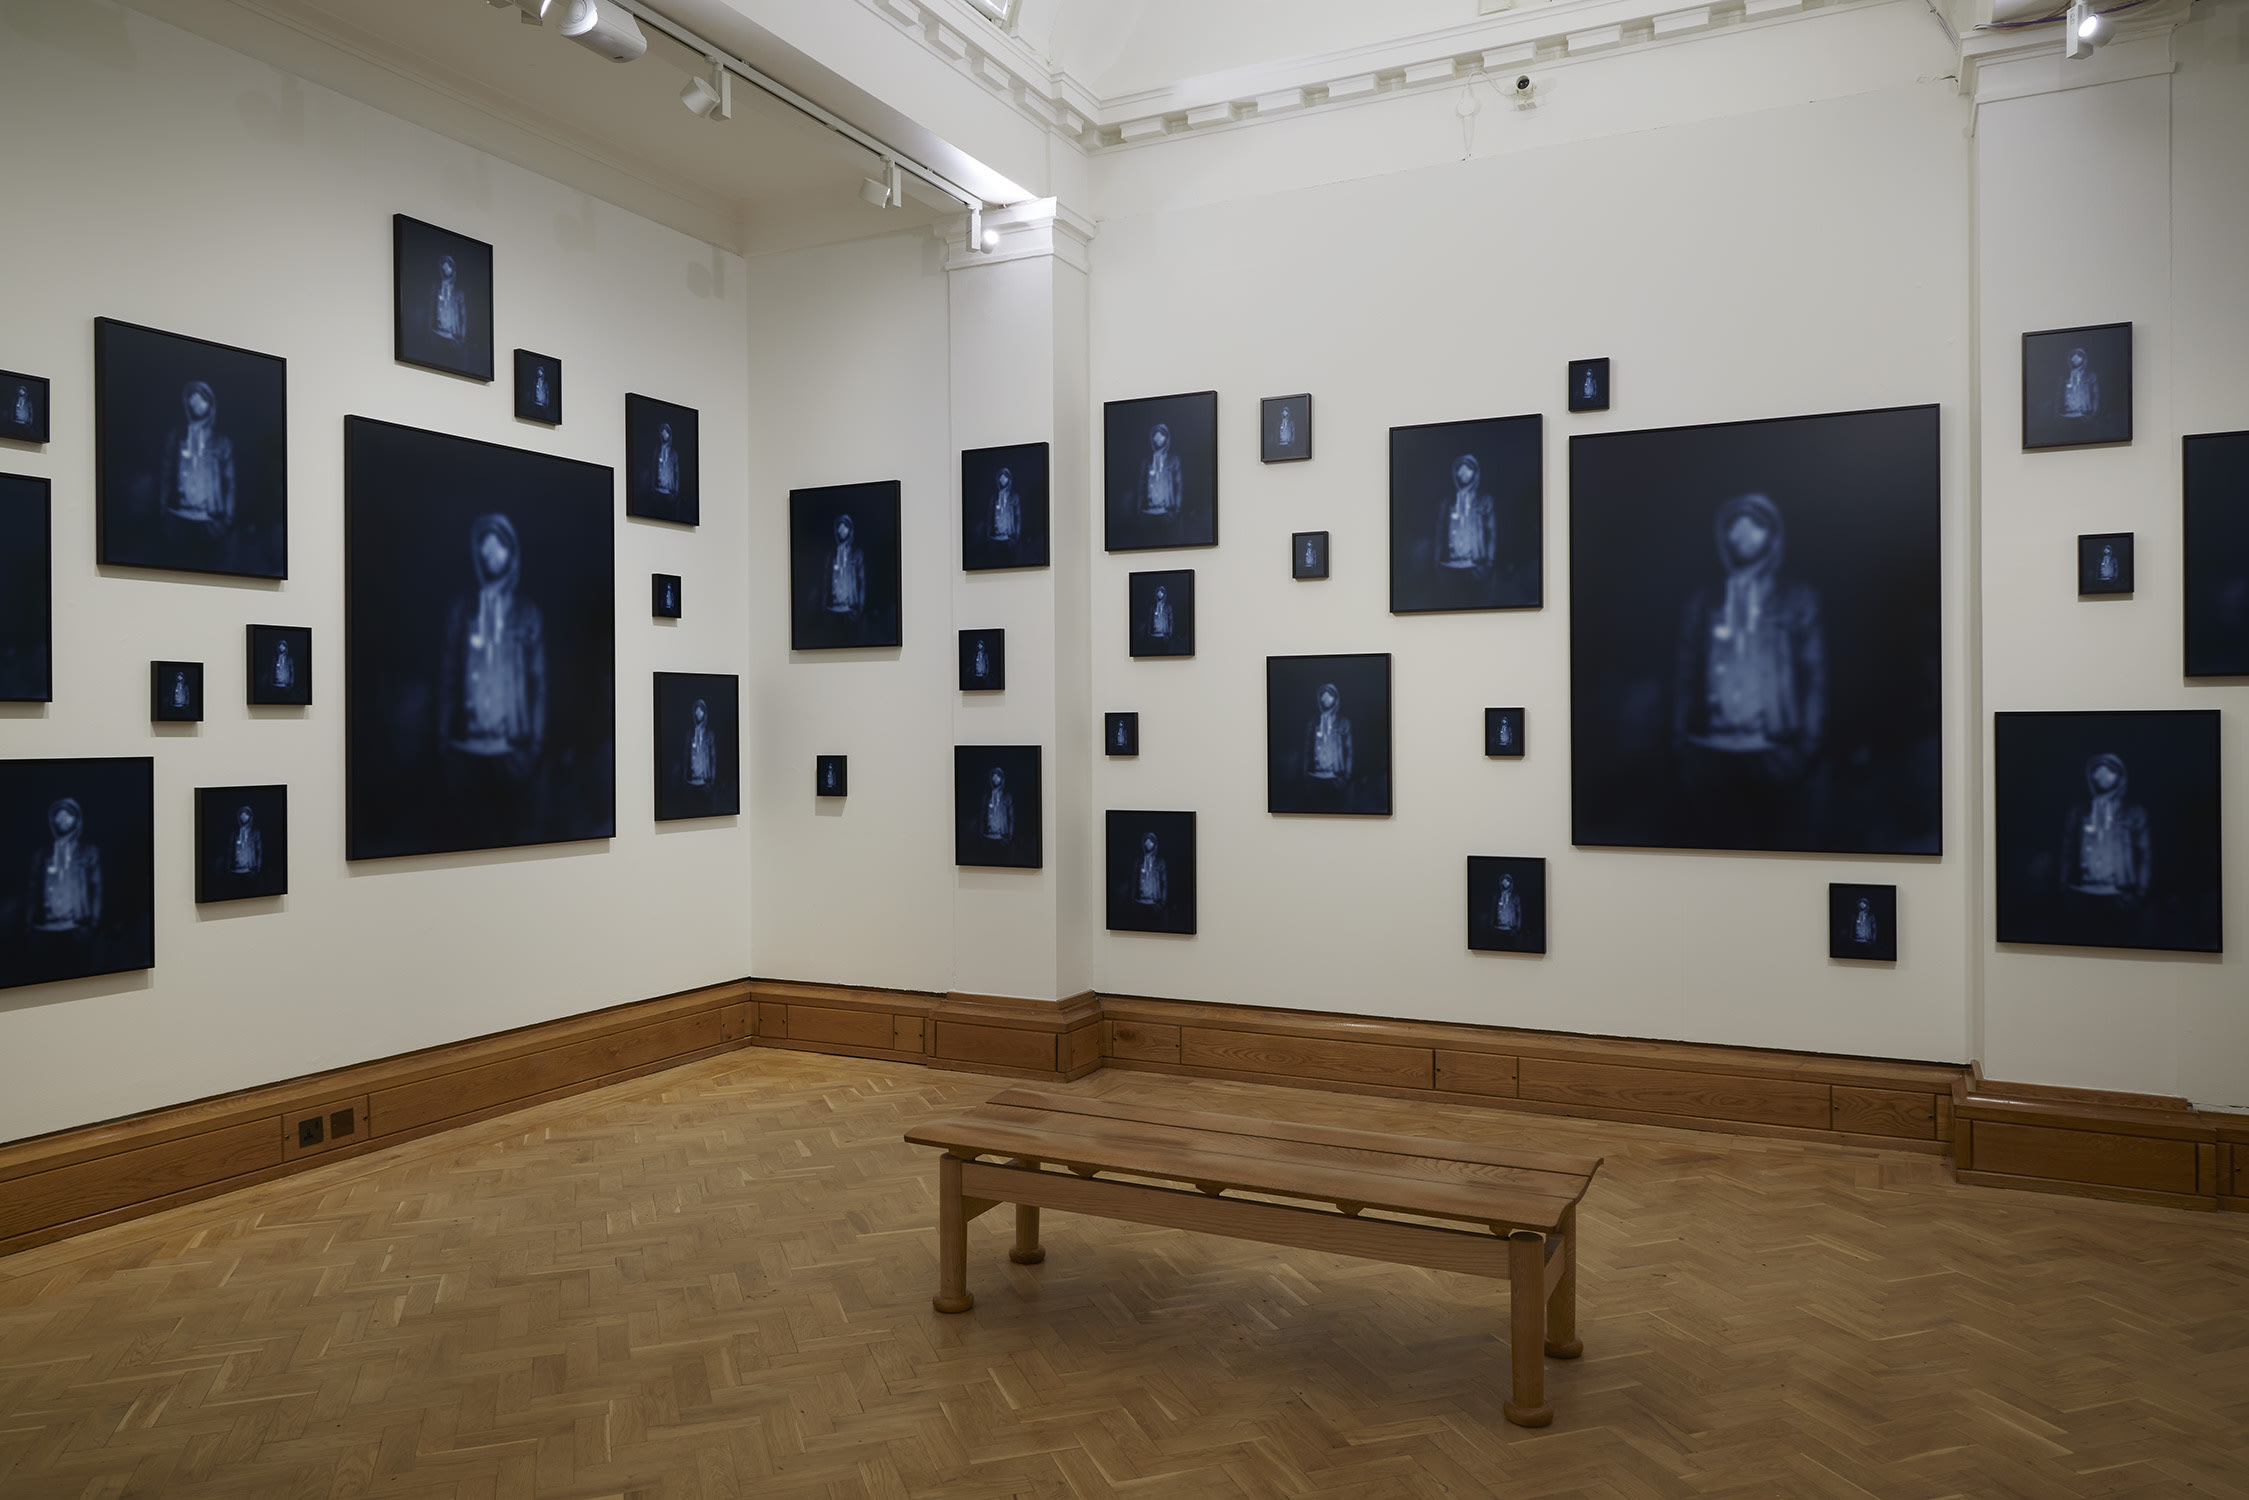 Installation view of Carrie Mae Weems, Repeating the Obvious, 2019, at Artes Mundi 9. 39 digital archival prints of various sizes. Photo by Stuart Whipps. Courtesy of the artist, Jack Shainman Gallery, New York and Galerie Barbara Thumm, Berlin. 